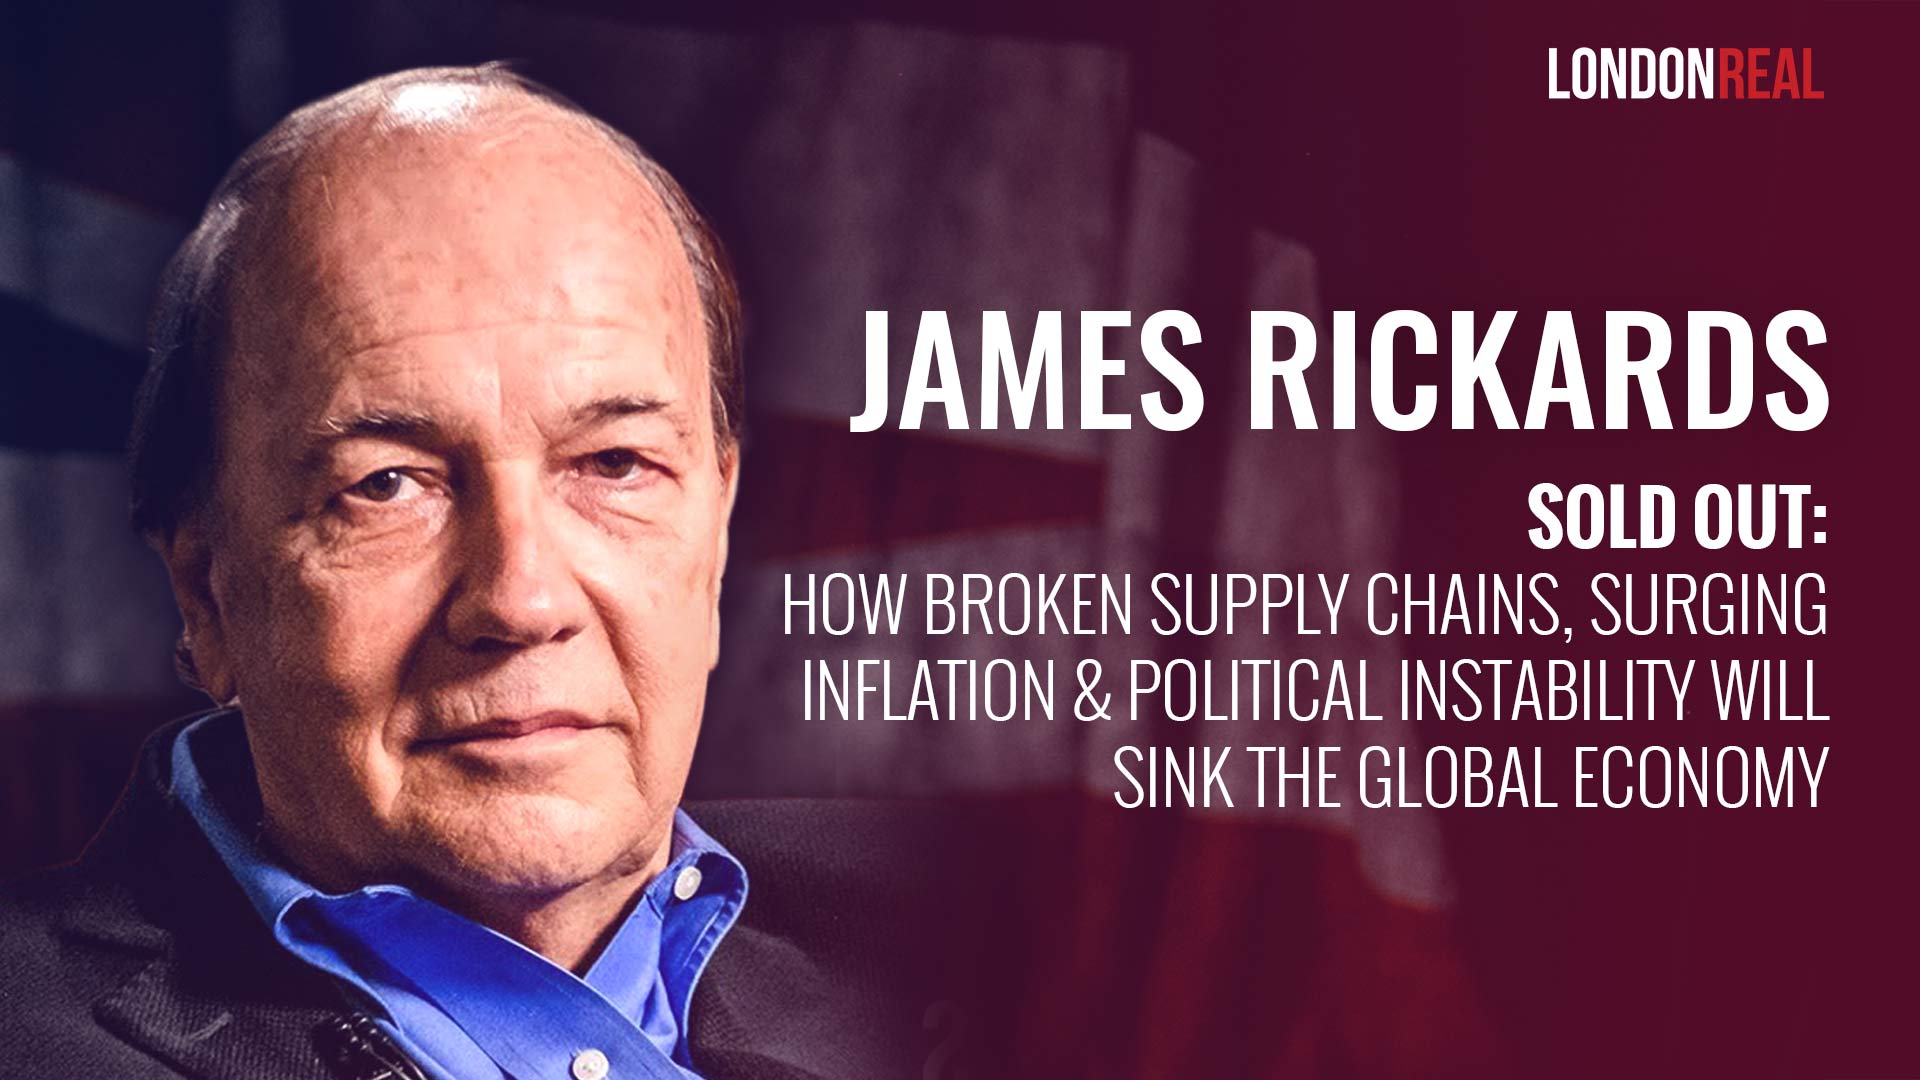 James Rickards - Sold Out: How Broken Supply Chains, Surging Inflation & Political Instability Will Sink The Global Economy